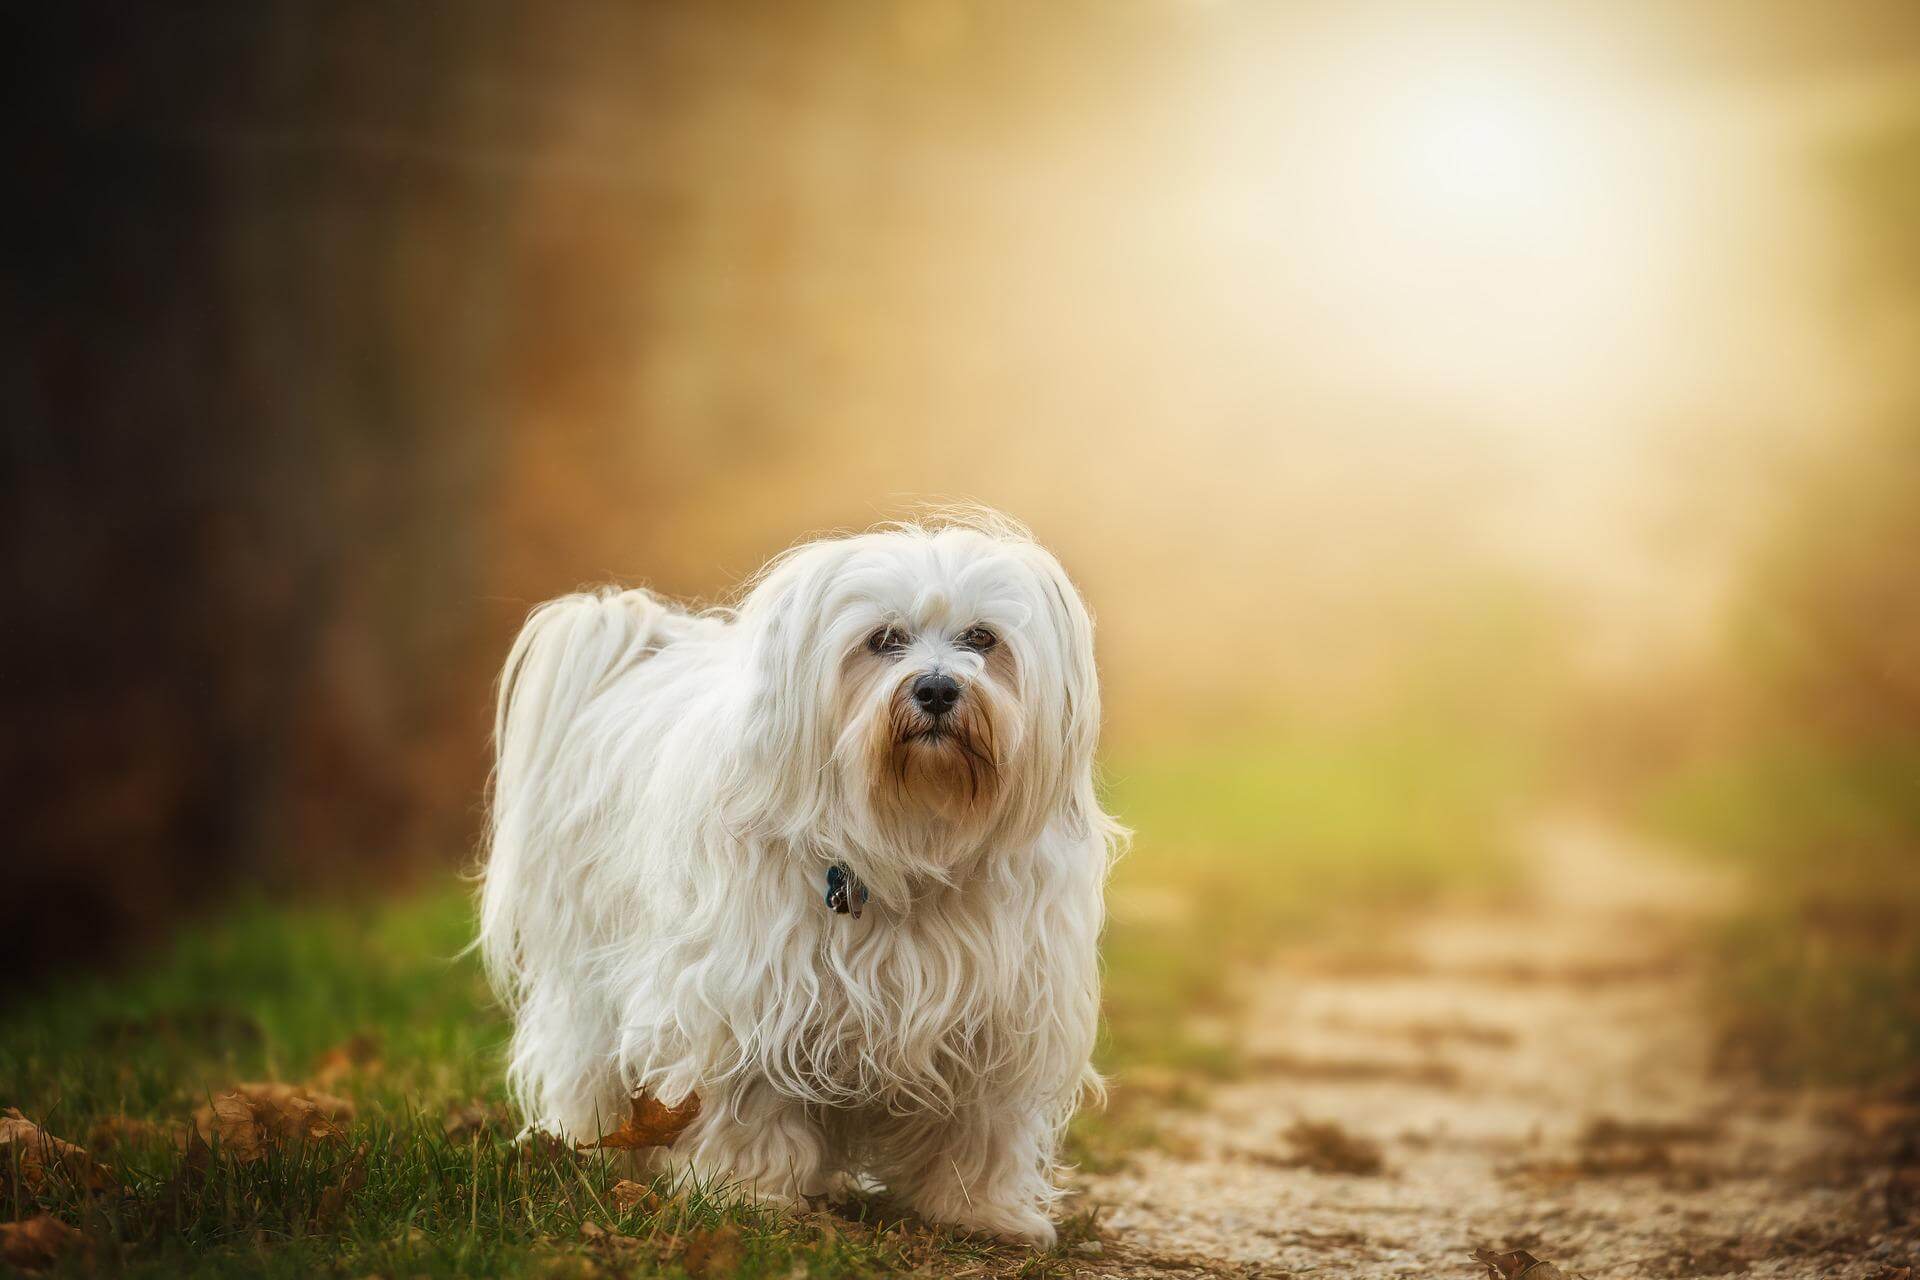 12 Long-Haired Dog Breeds